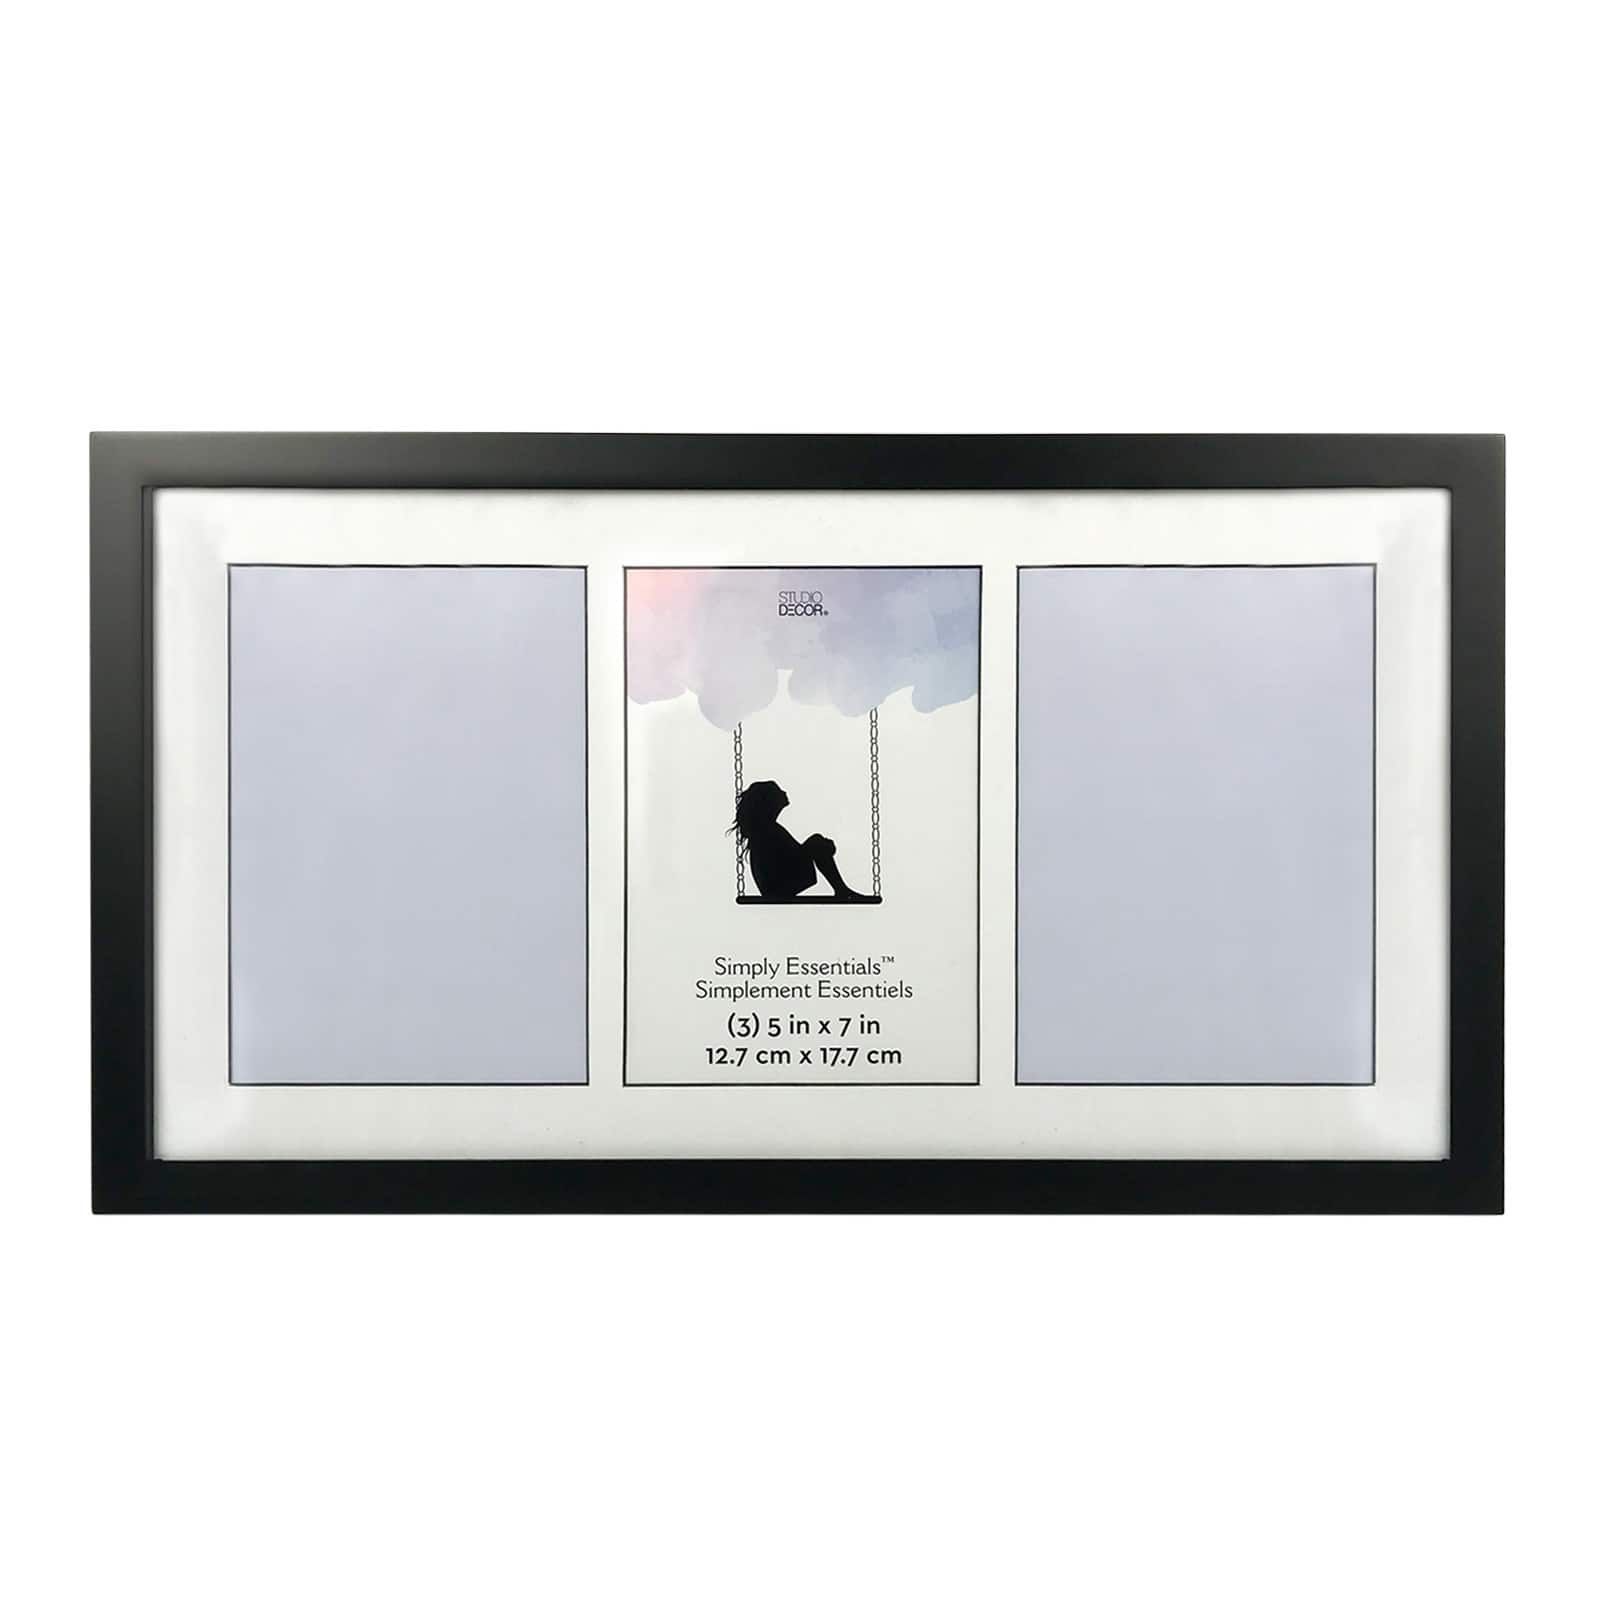 Mia Beaded Photo Frame 5x7 inch | M&S Collection | M&S